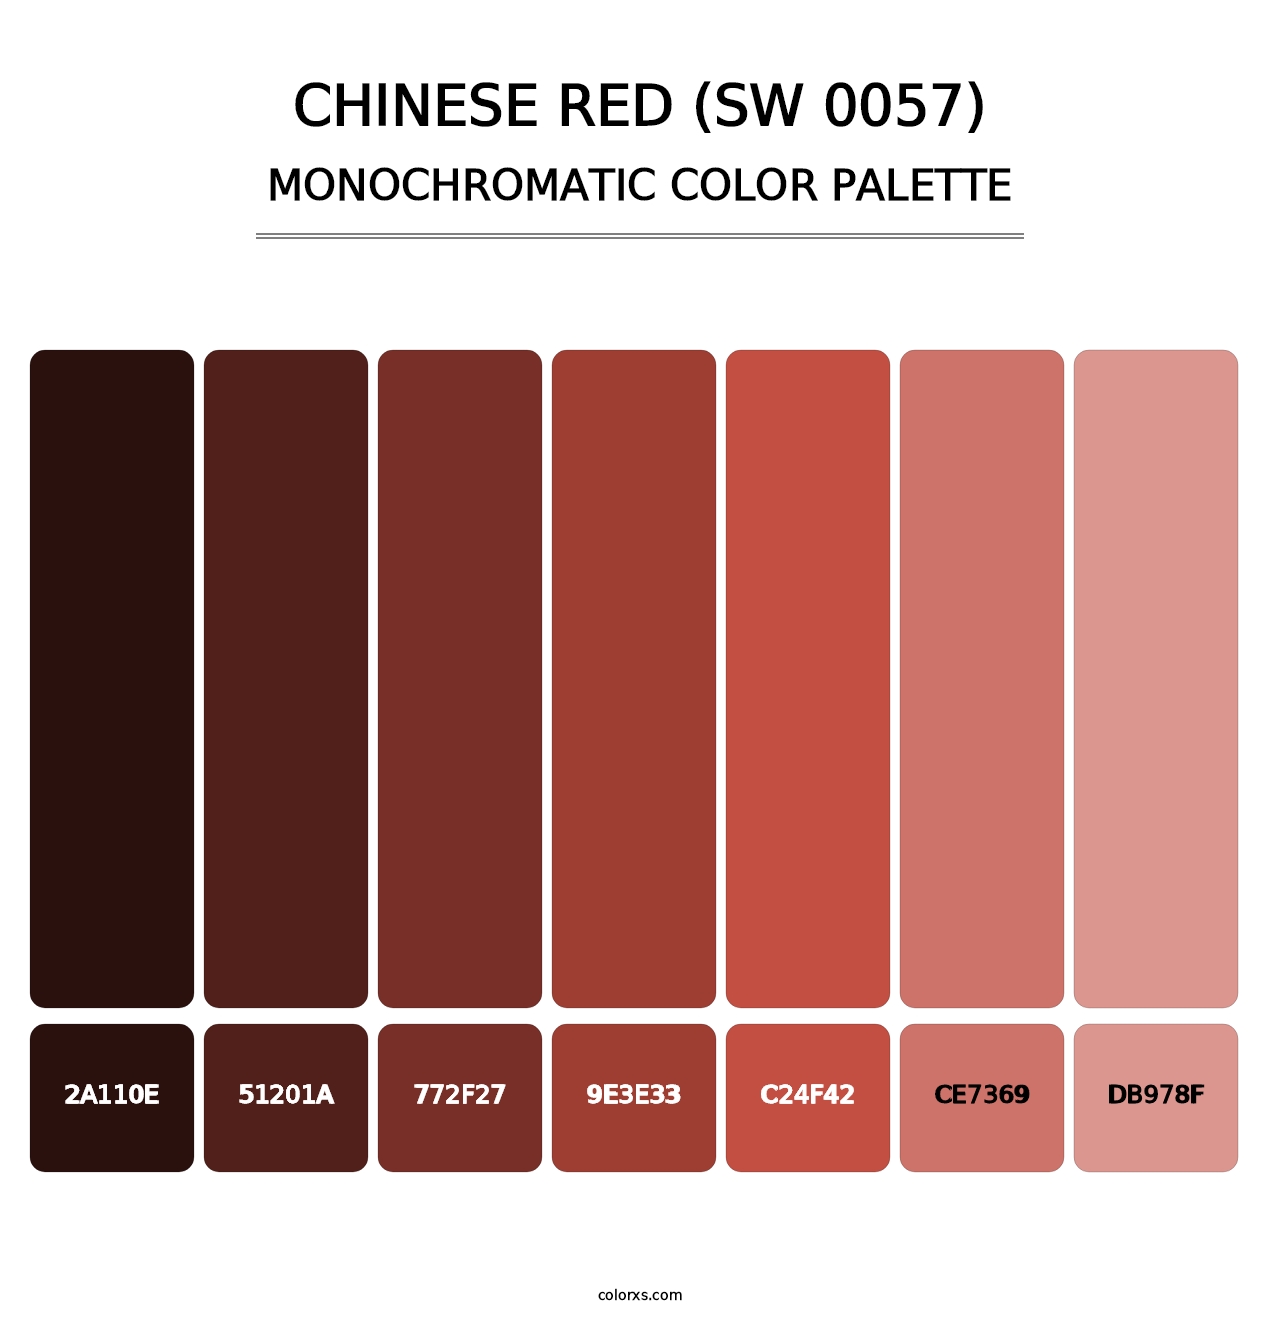 Chinese Red (SW 0057) - Monochromatic Color Palette